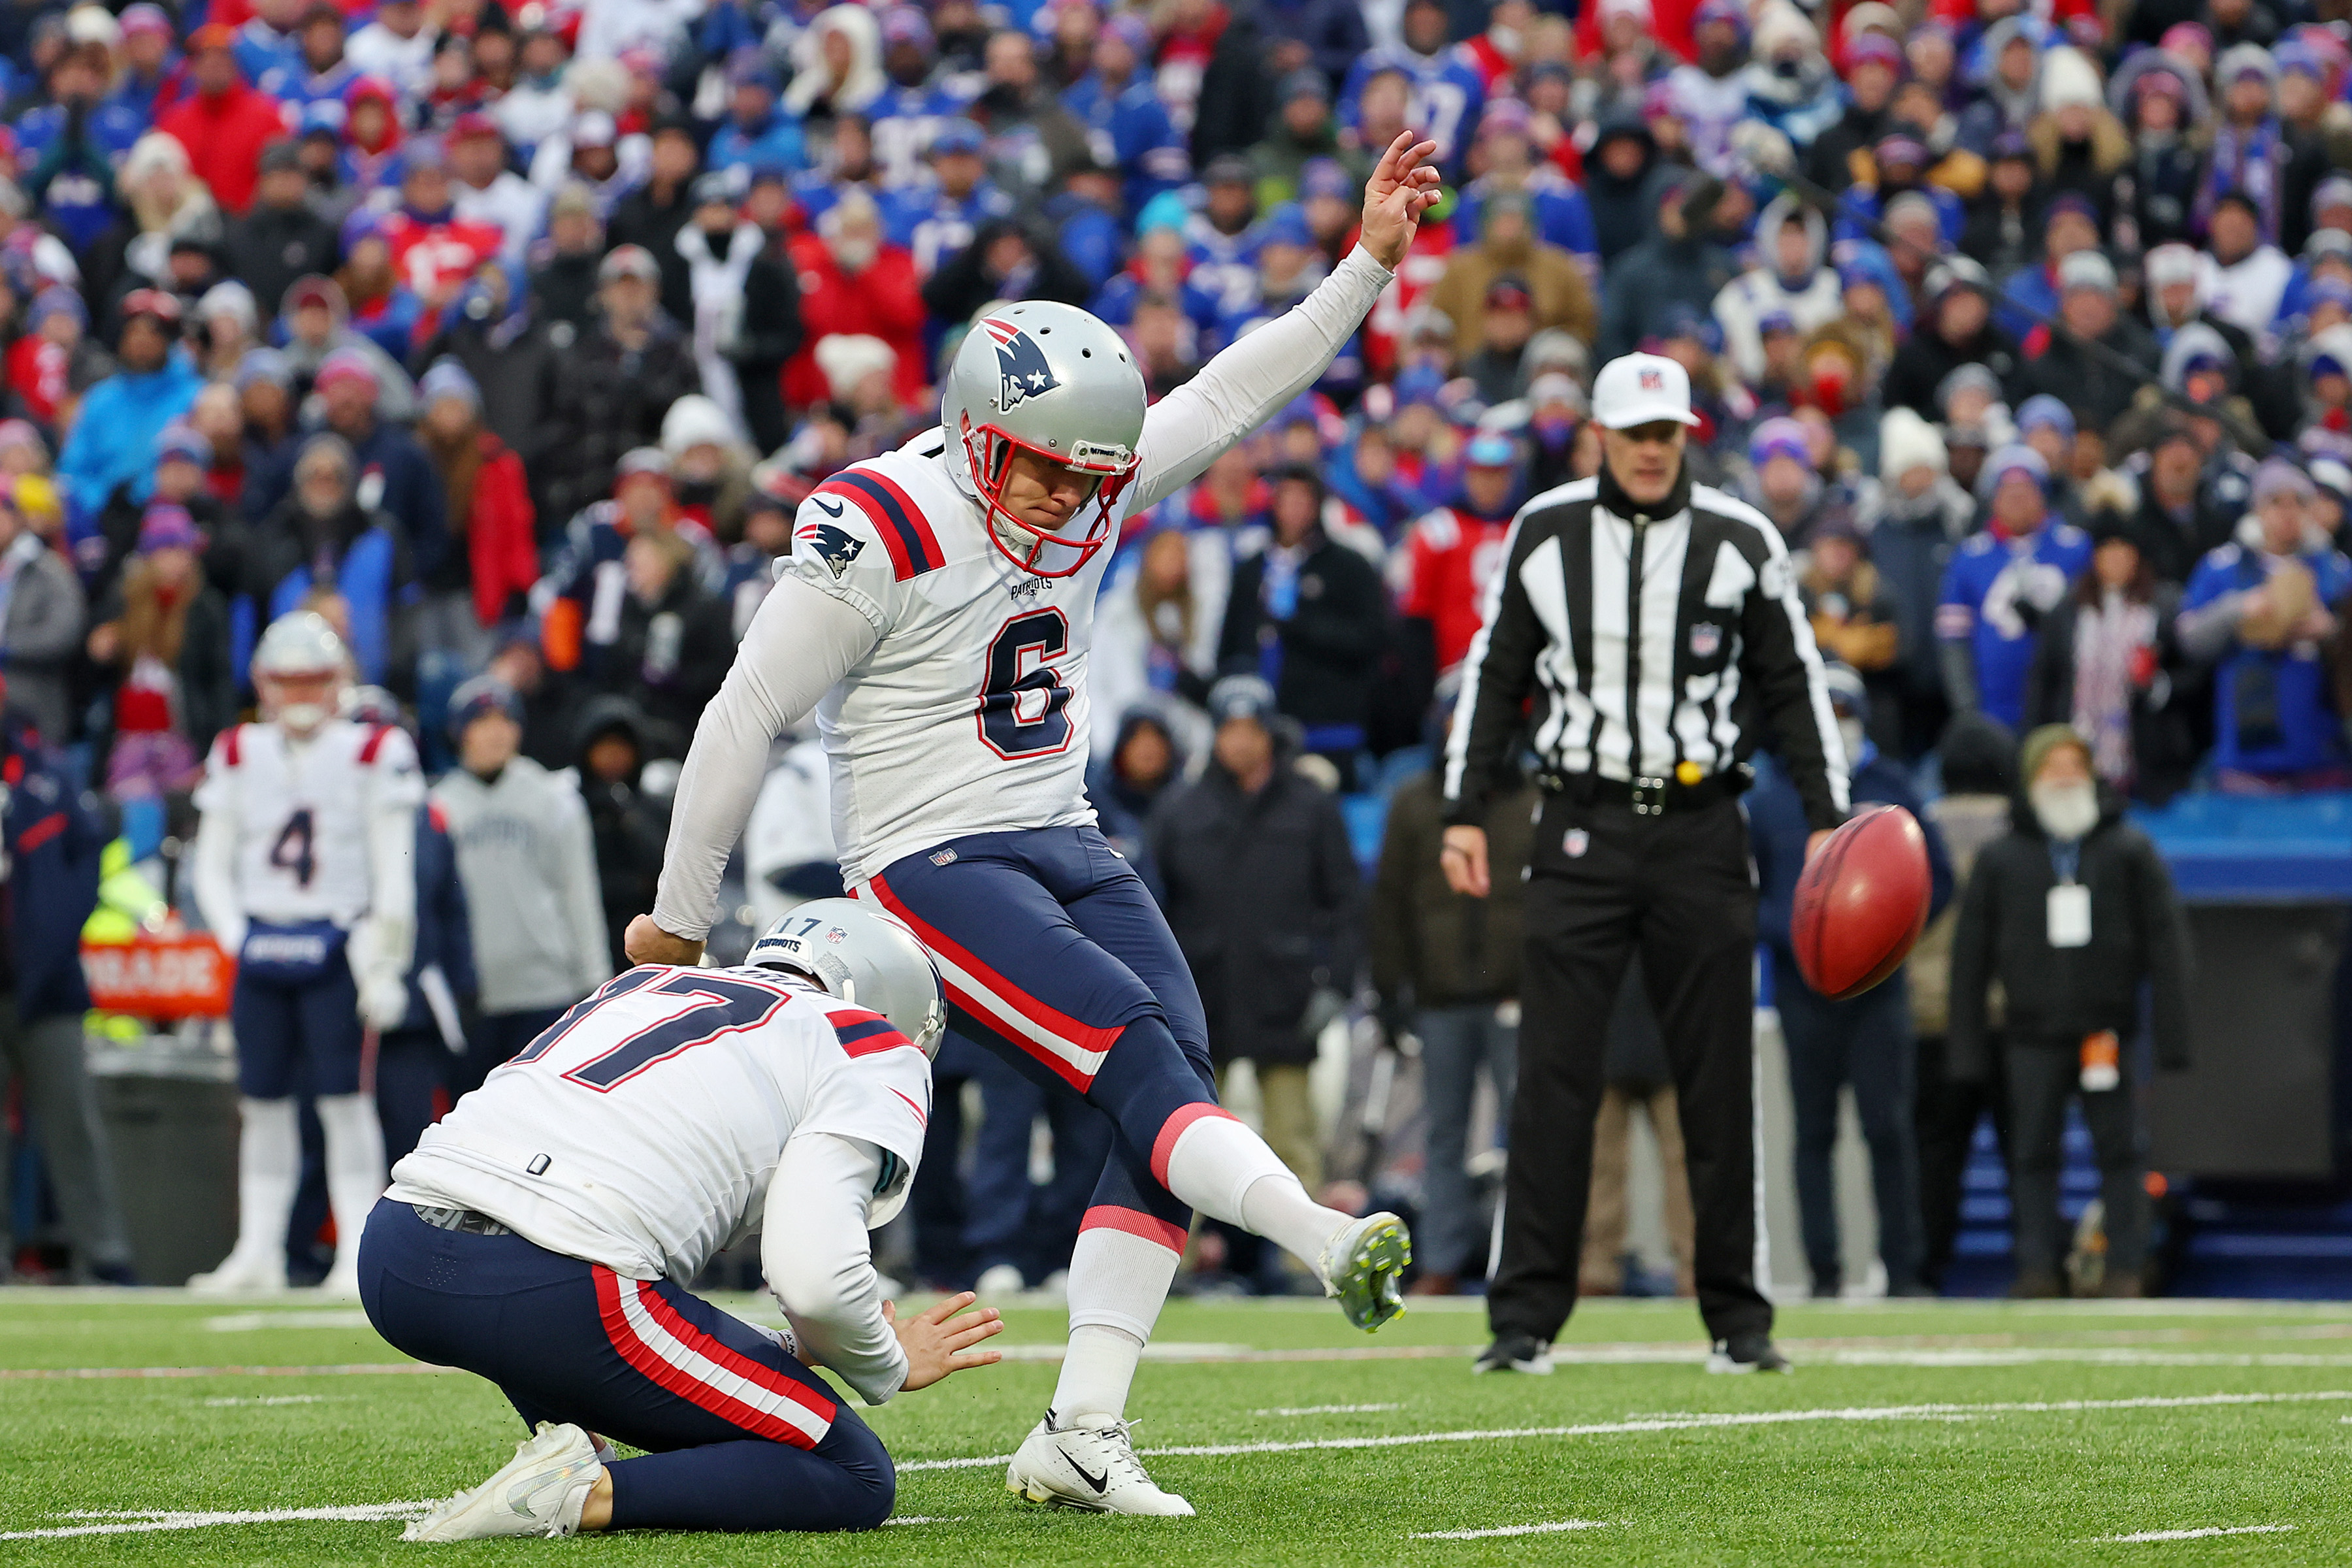 Kicker Nick Folk #6 of the New England Patriots kicks a field goal during the 3rd quarter of the game against the Buffalo Bills at Highmark Stadium on January 08, 2023 in Orchard Park, New York.